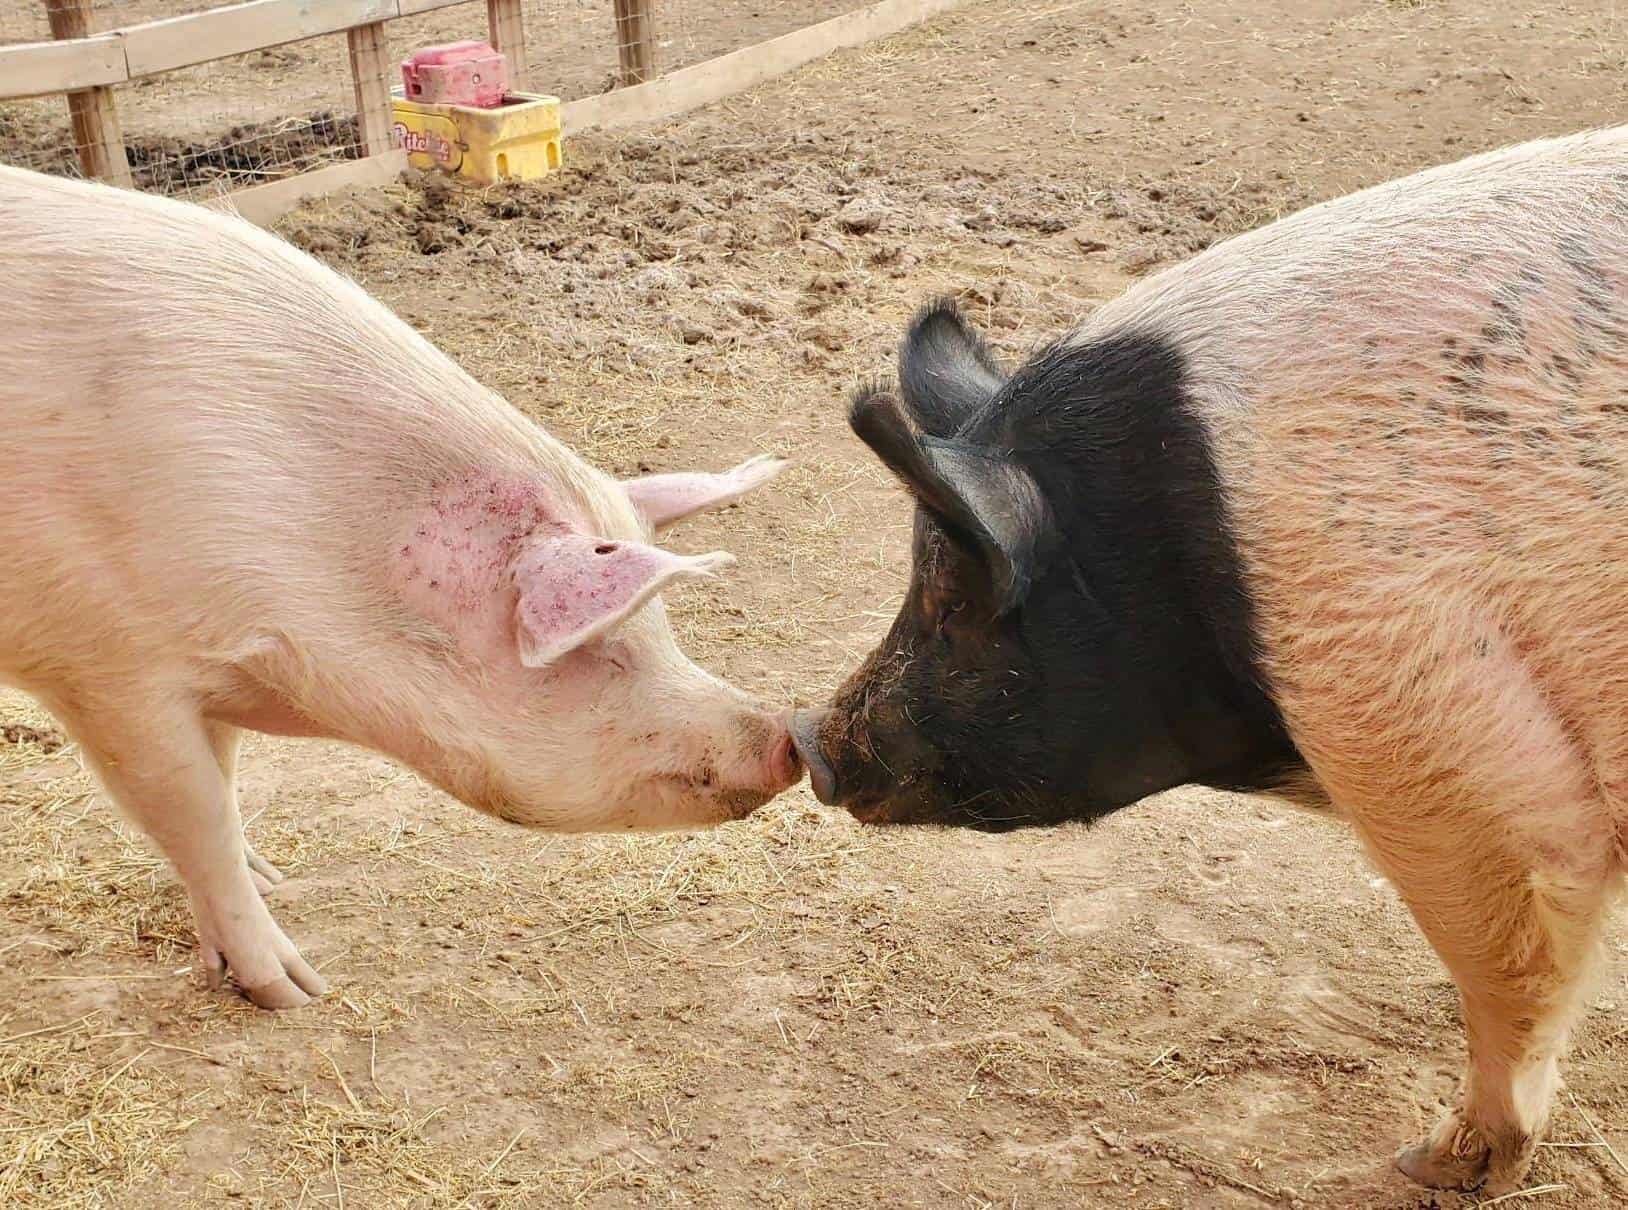 Safe Cohabitation Considerations For Pigs - The Open Sanctuary Project